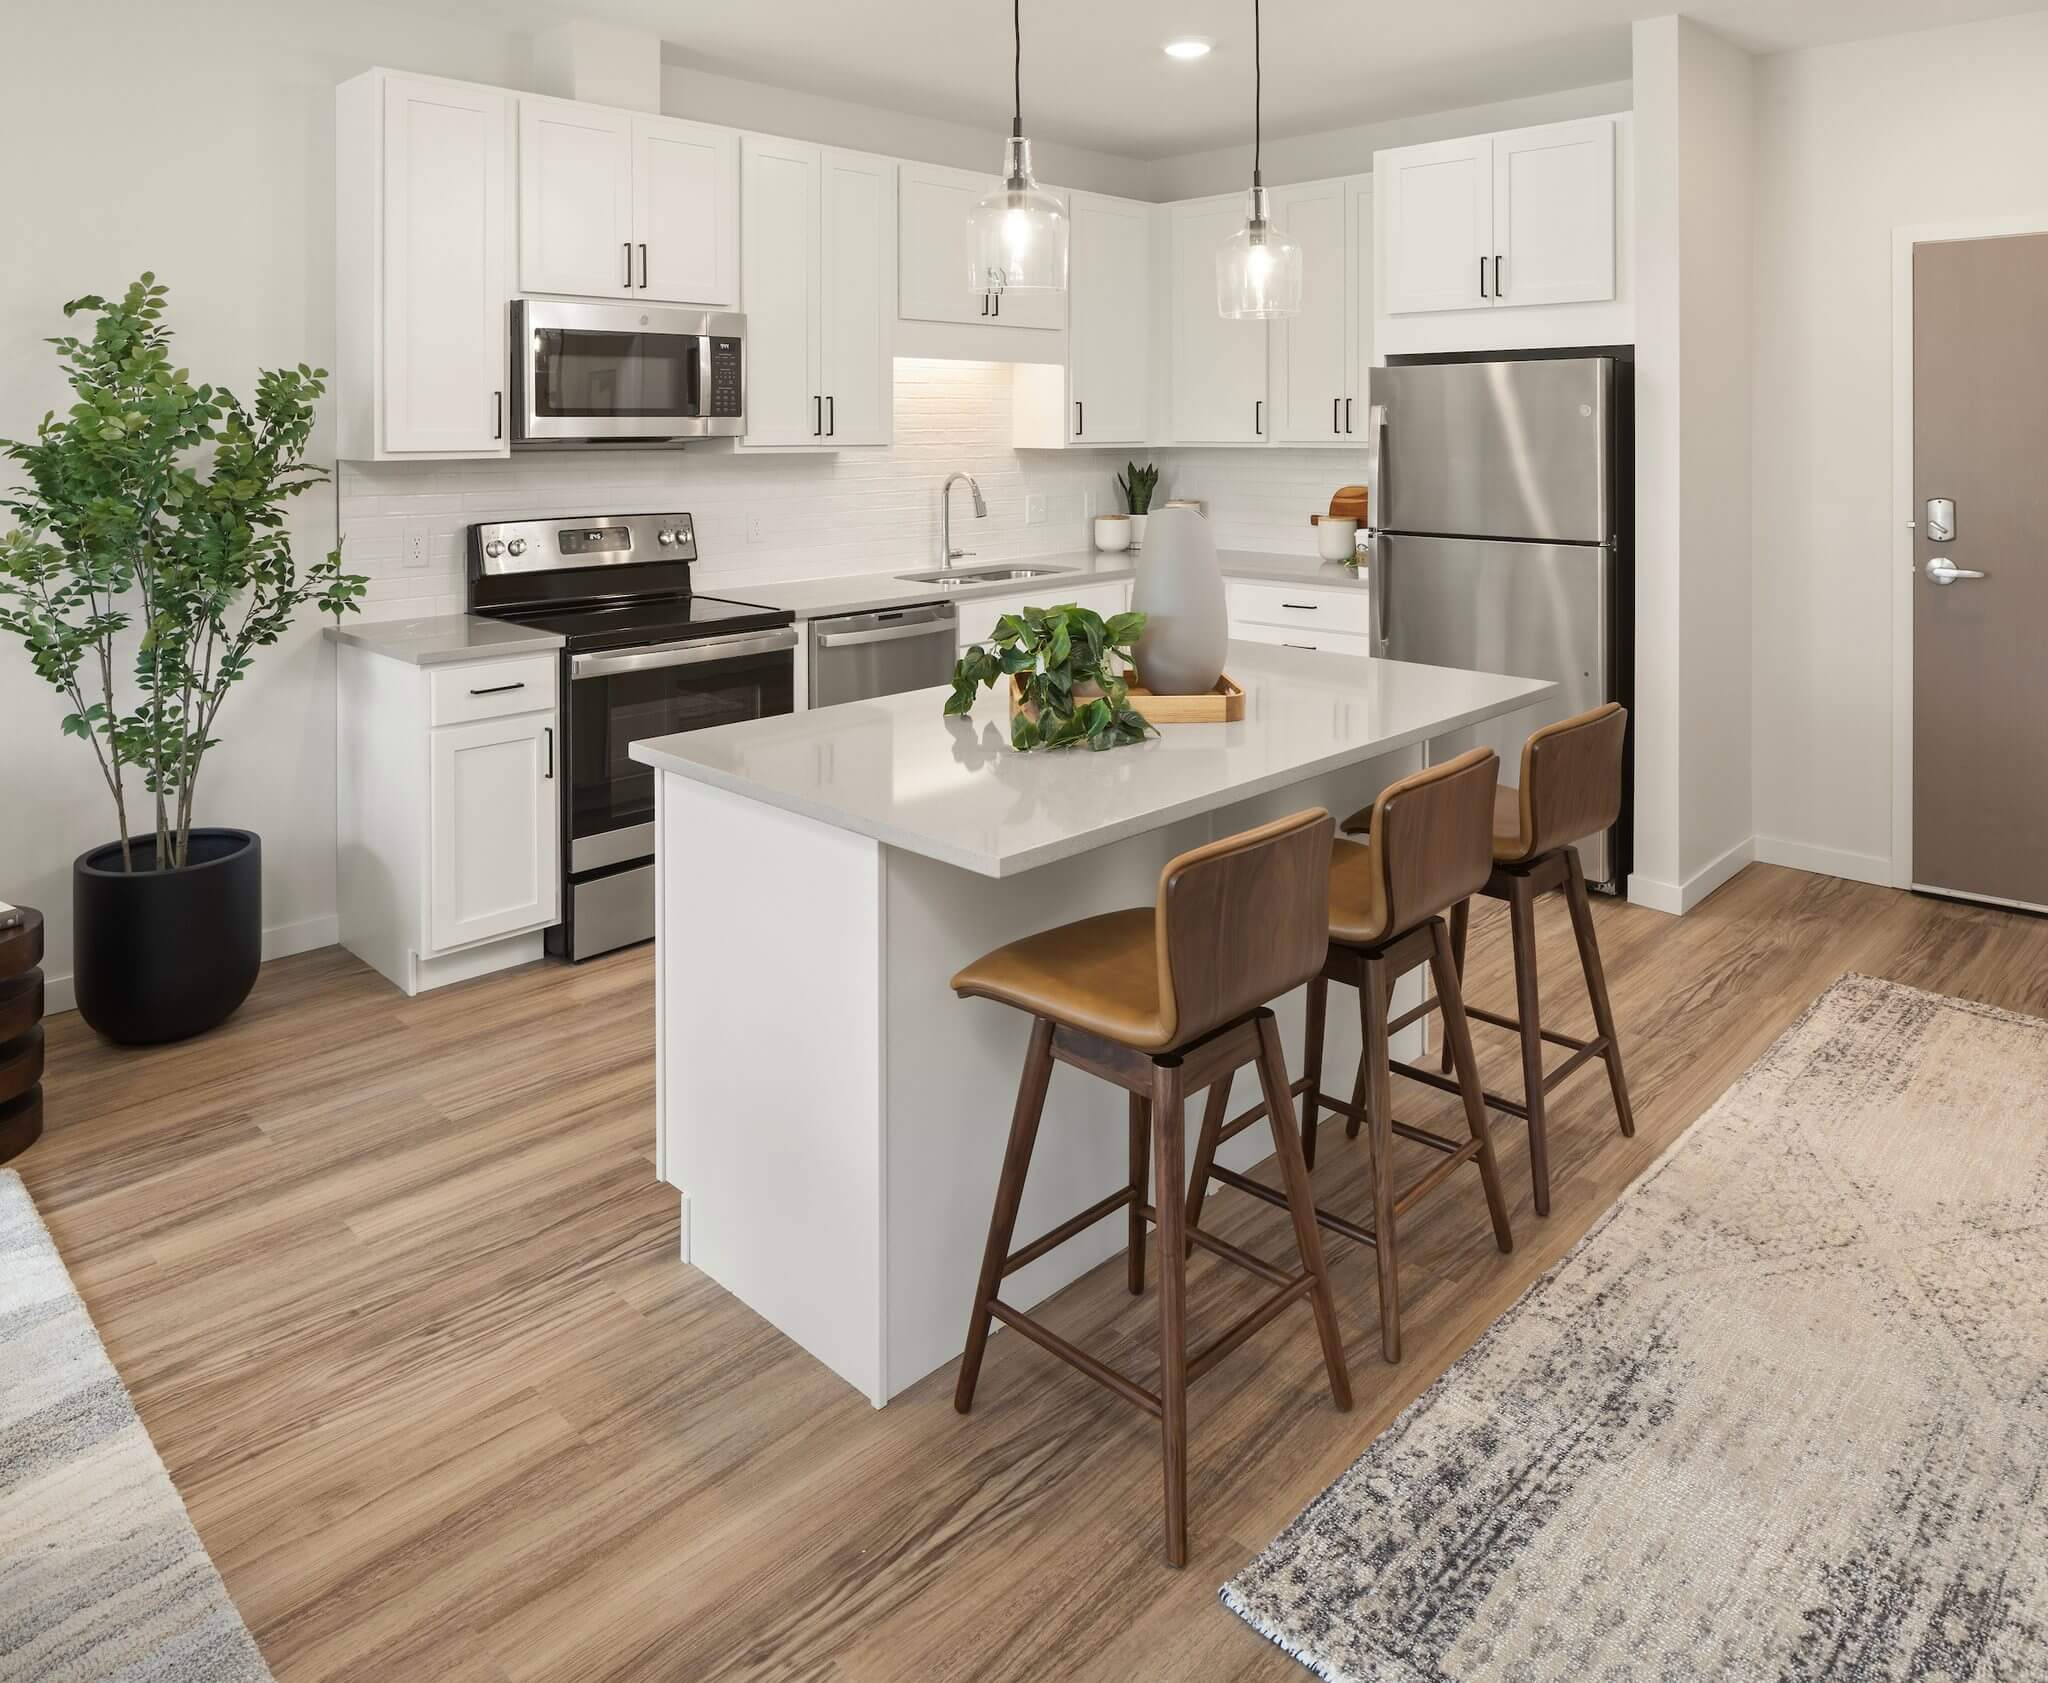 Aster at Riverdale Station apartment kitchen with kitchen island, barstools, pendant lighting, and stainless steel appliances